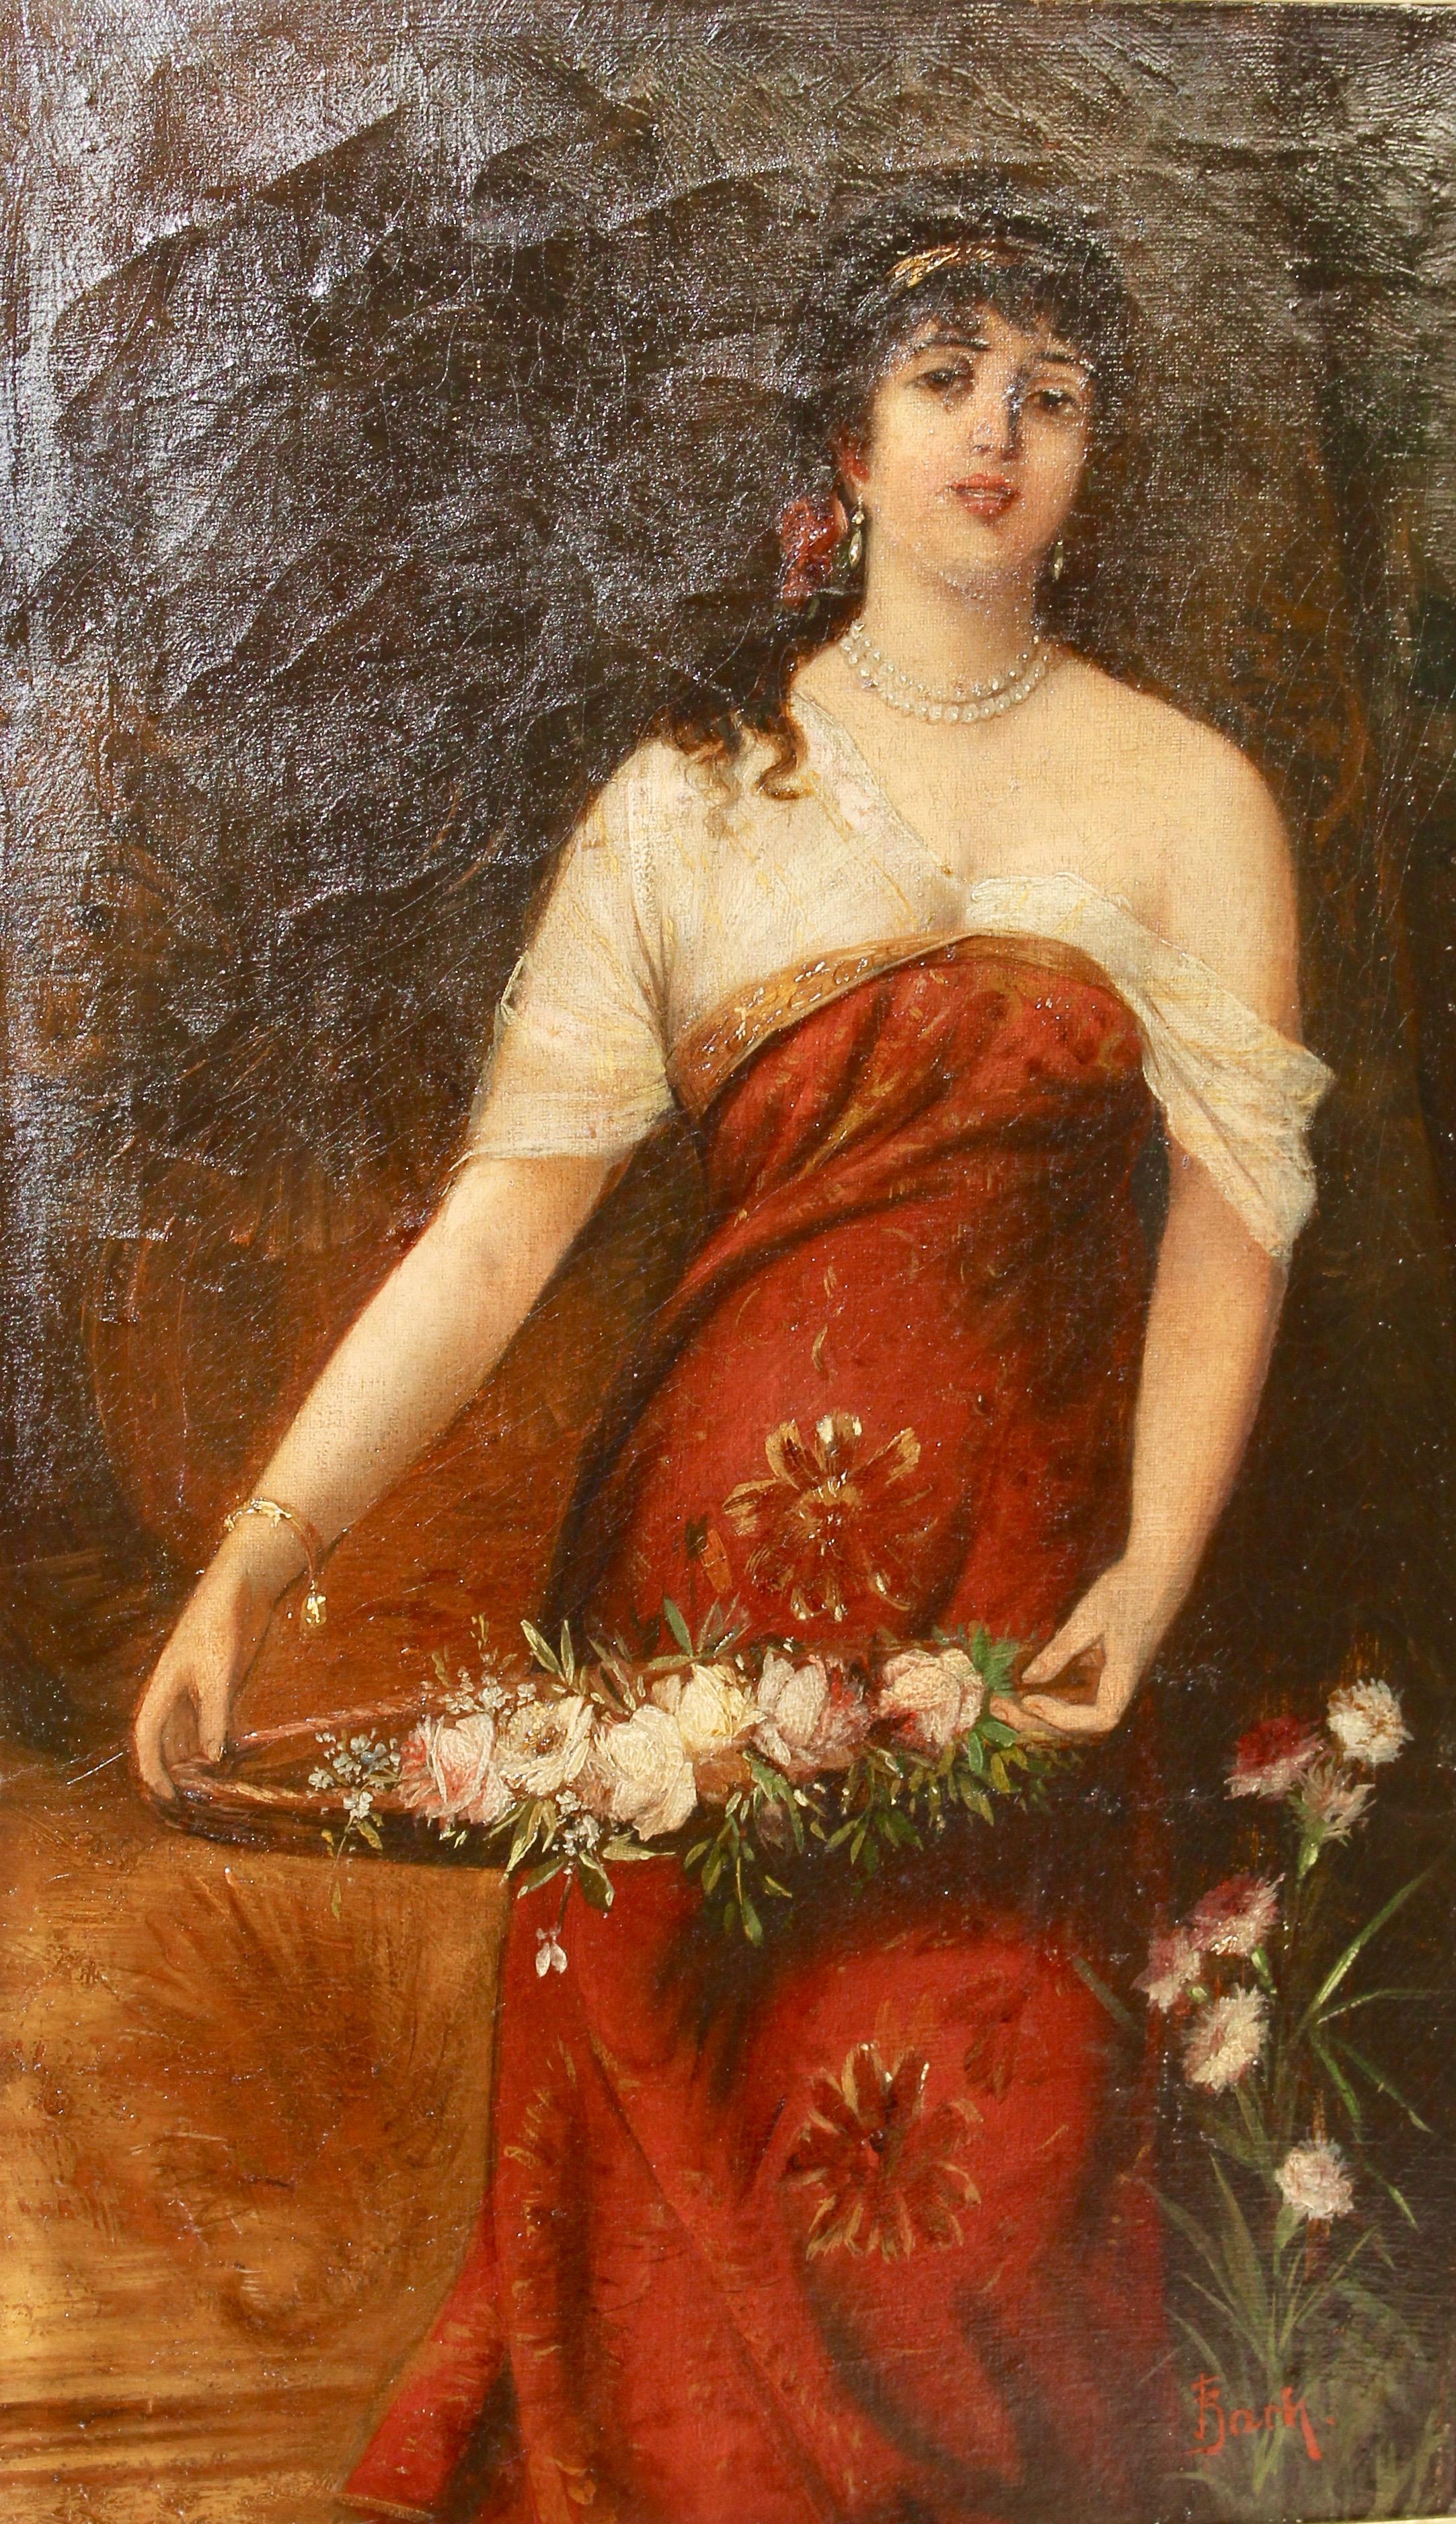 Unknown Figurative Painting - Painting, 19th century, oil on canvas, "Young woman with flower basket"